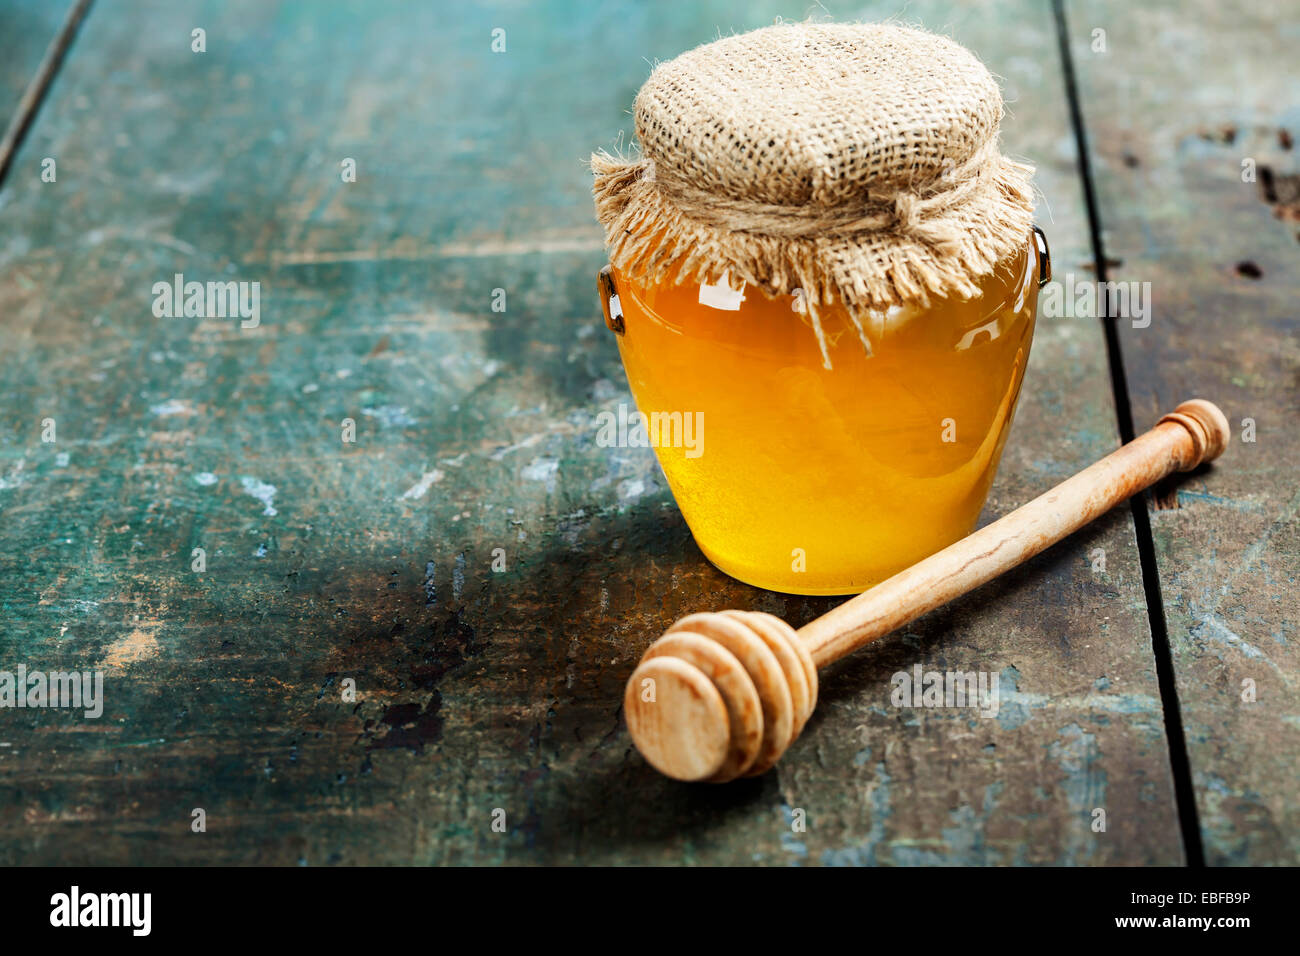 Honey jar and dipper on wooden background Stock Photo